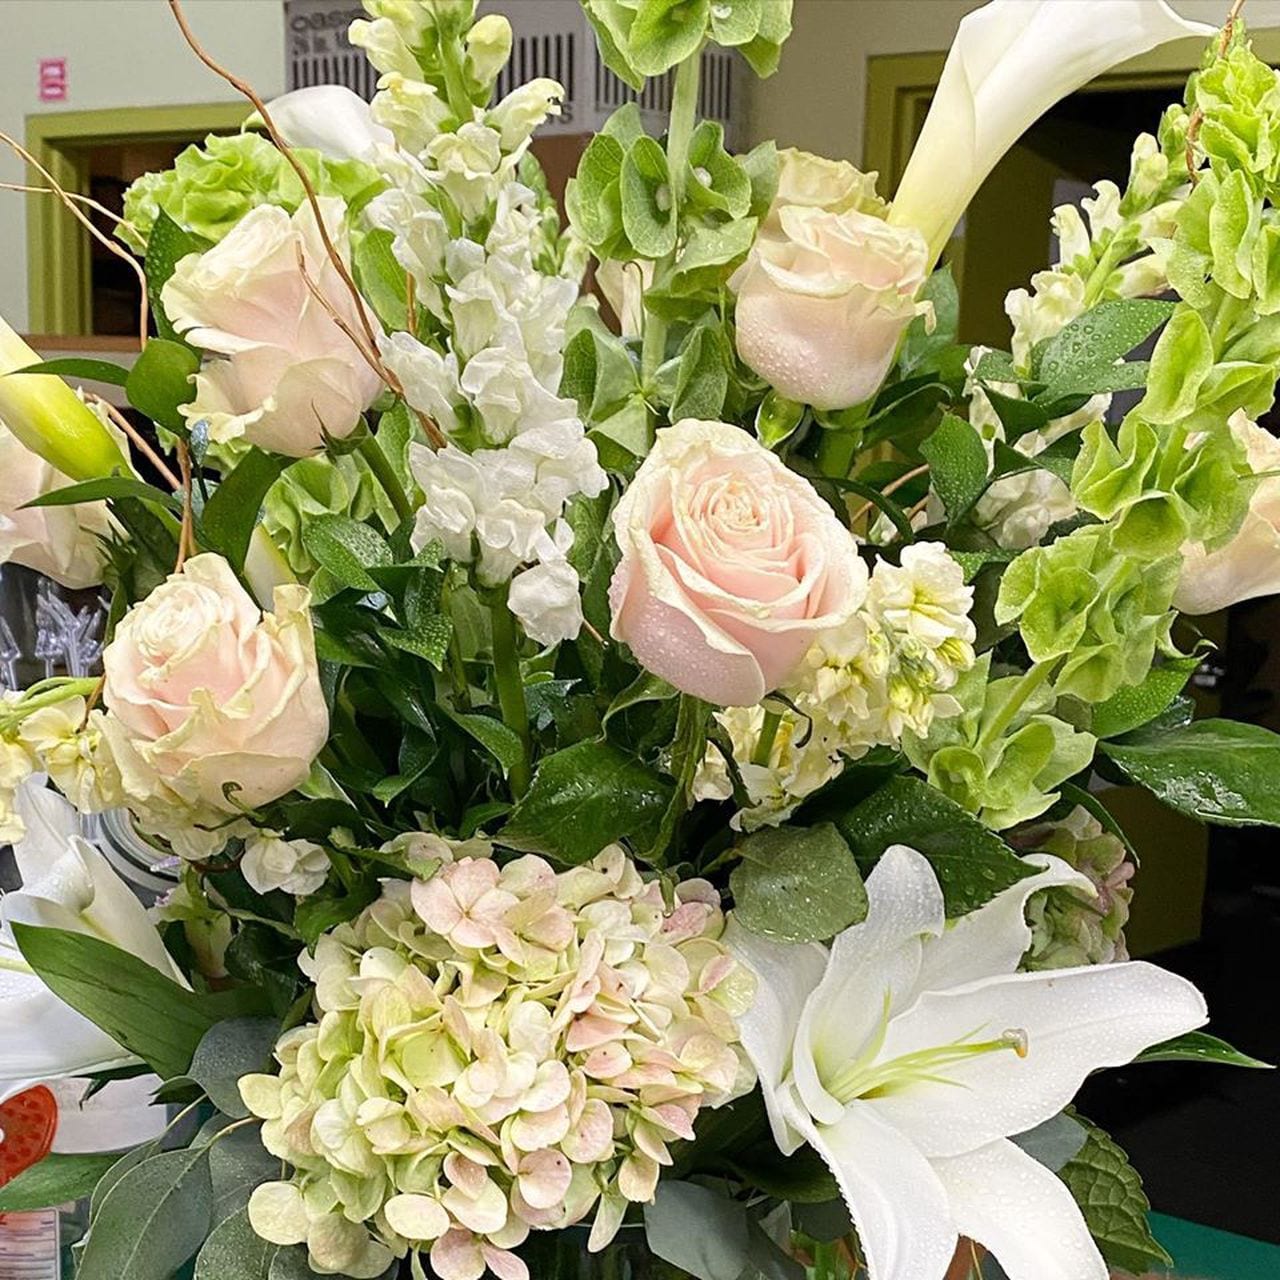 ‘The power of flowers’: Alabama’s florists cope with pandemic, recovery